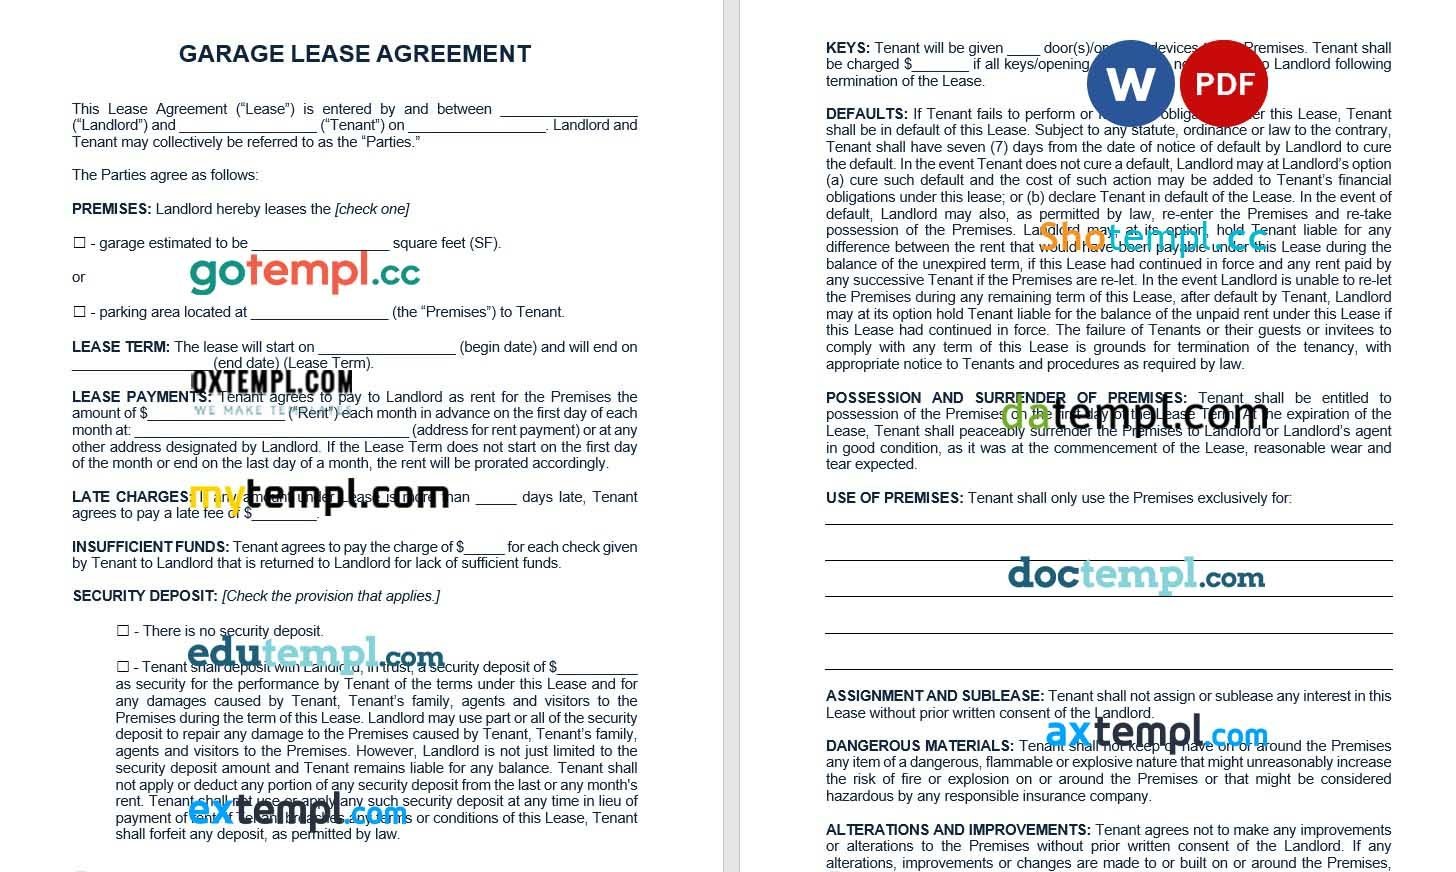 Garage Lease Agreement Word example, fully editable